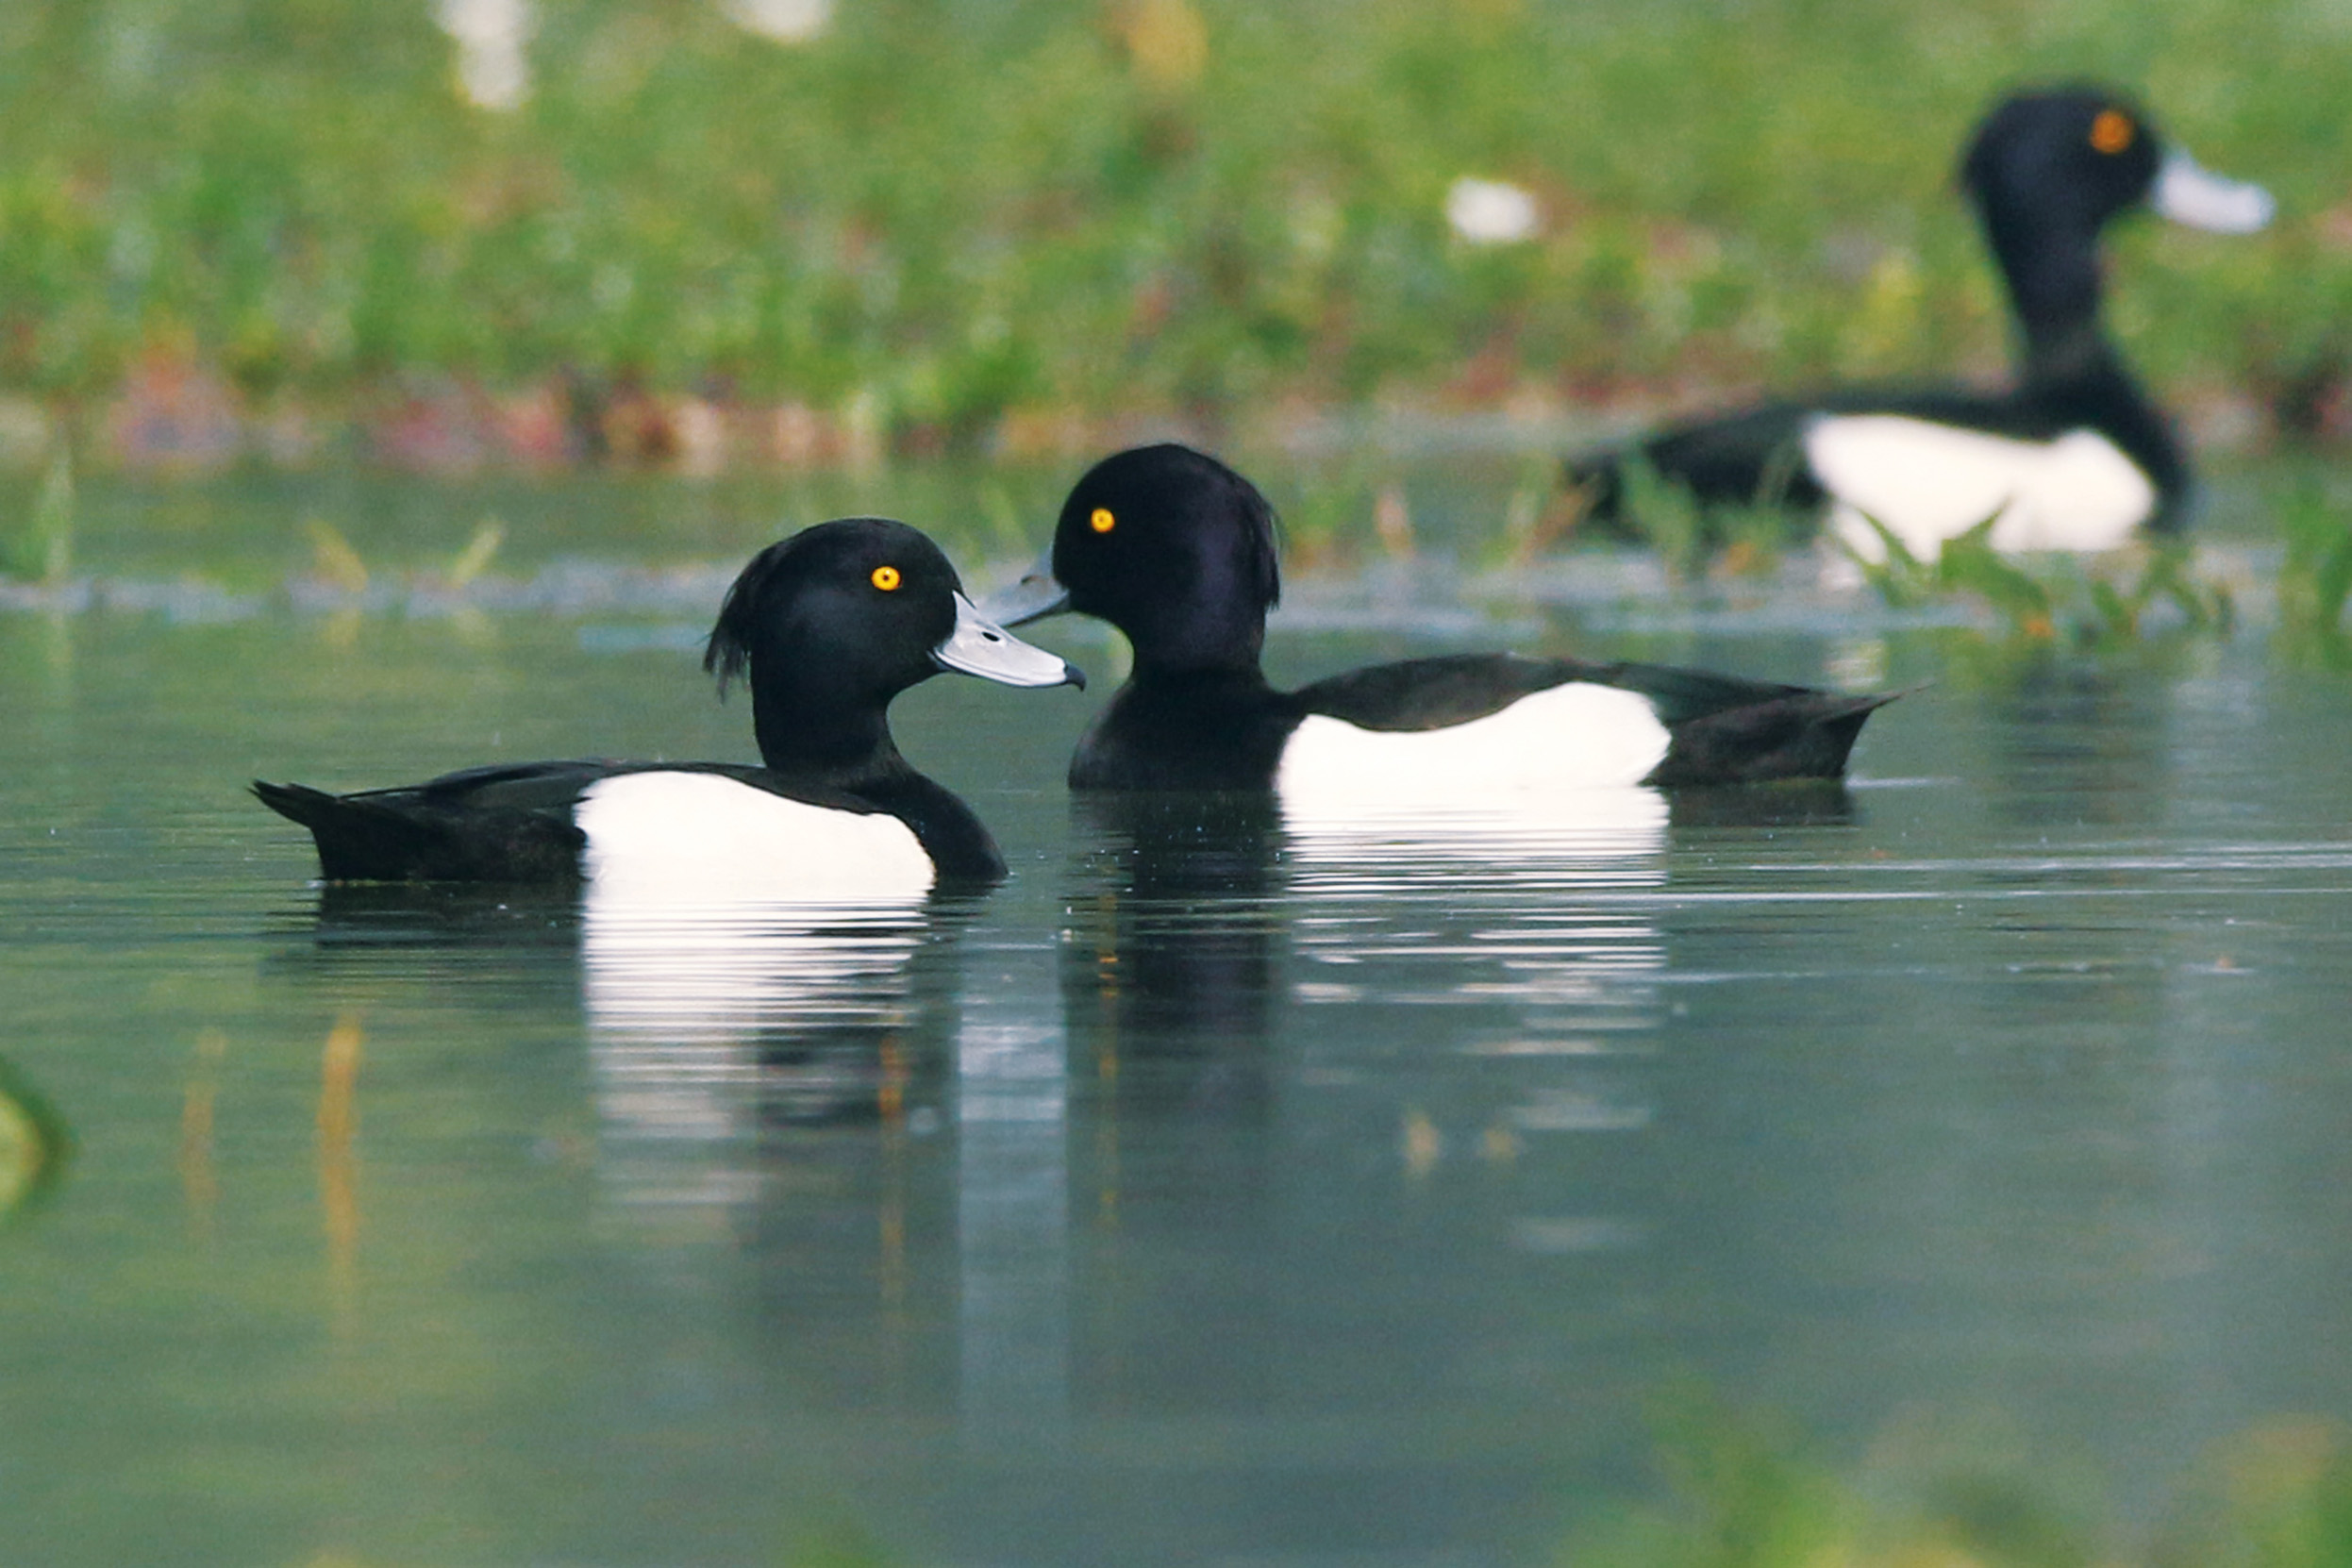 Three male Tufted Ducks sat together on murky waters surrounded by grassy banks.